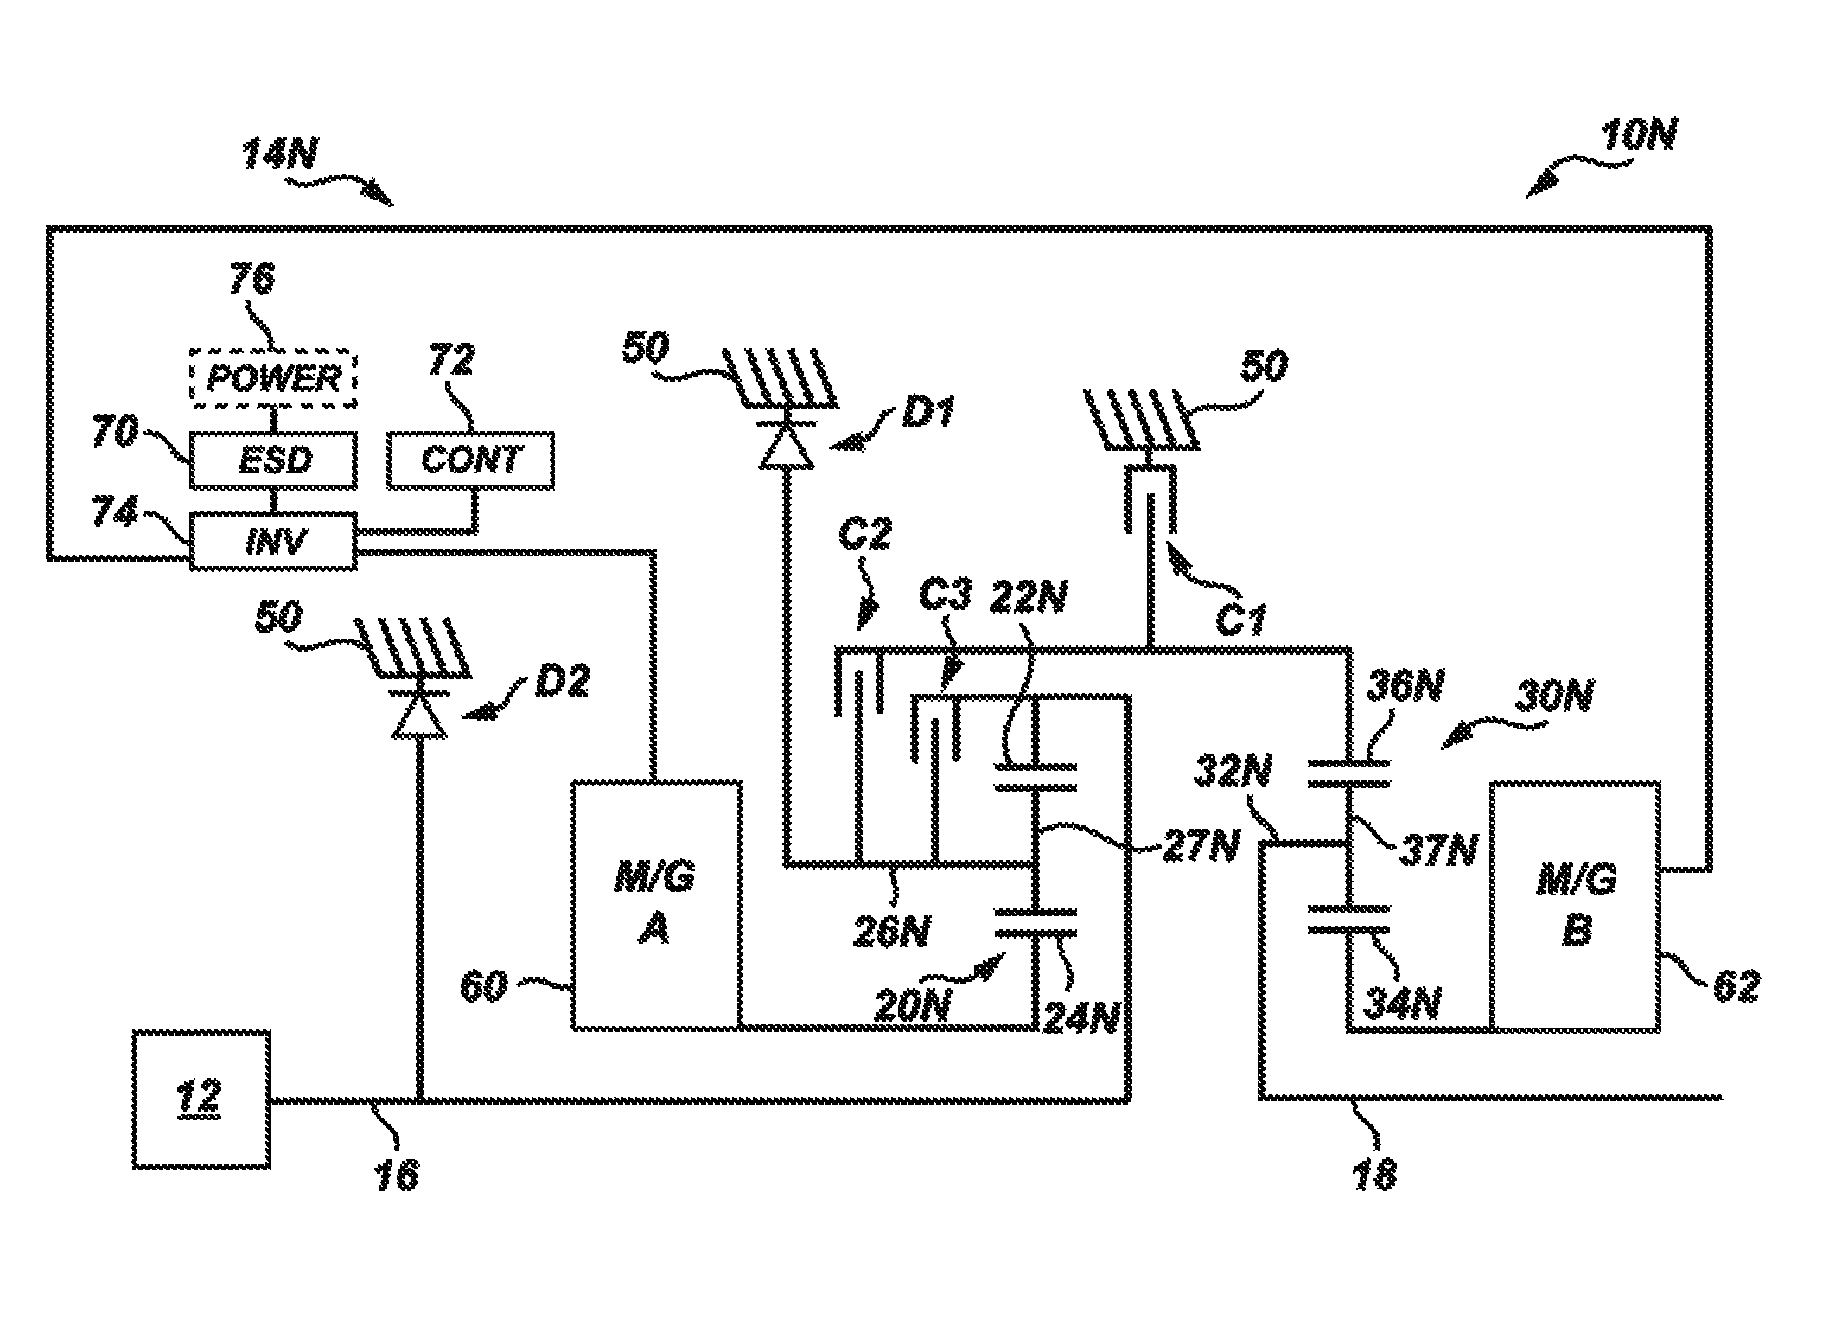 Output-split electrically-variable transmission with two planetary gear sets and two motor/generators